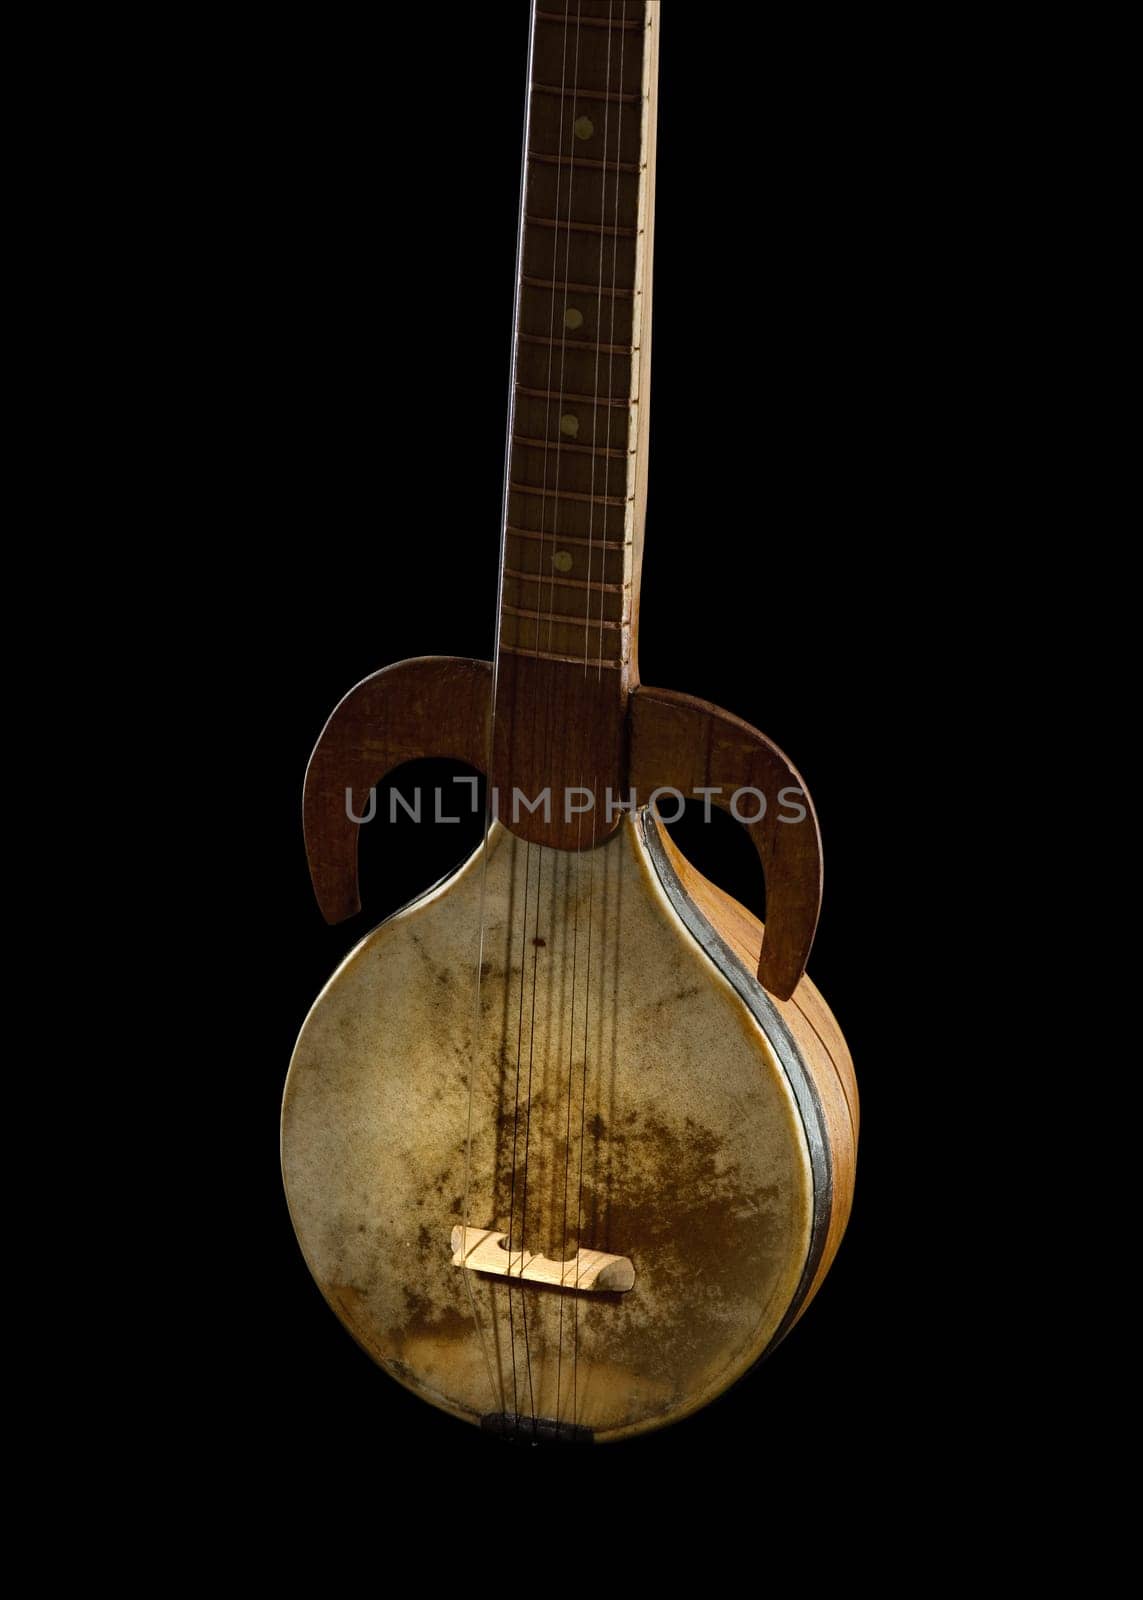 An ancient Asian stringed musical instrument on a black background